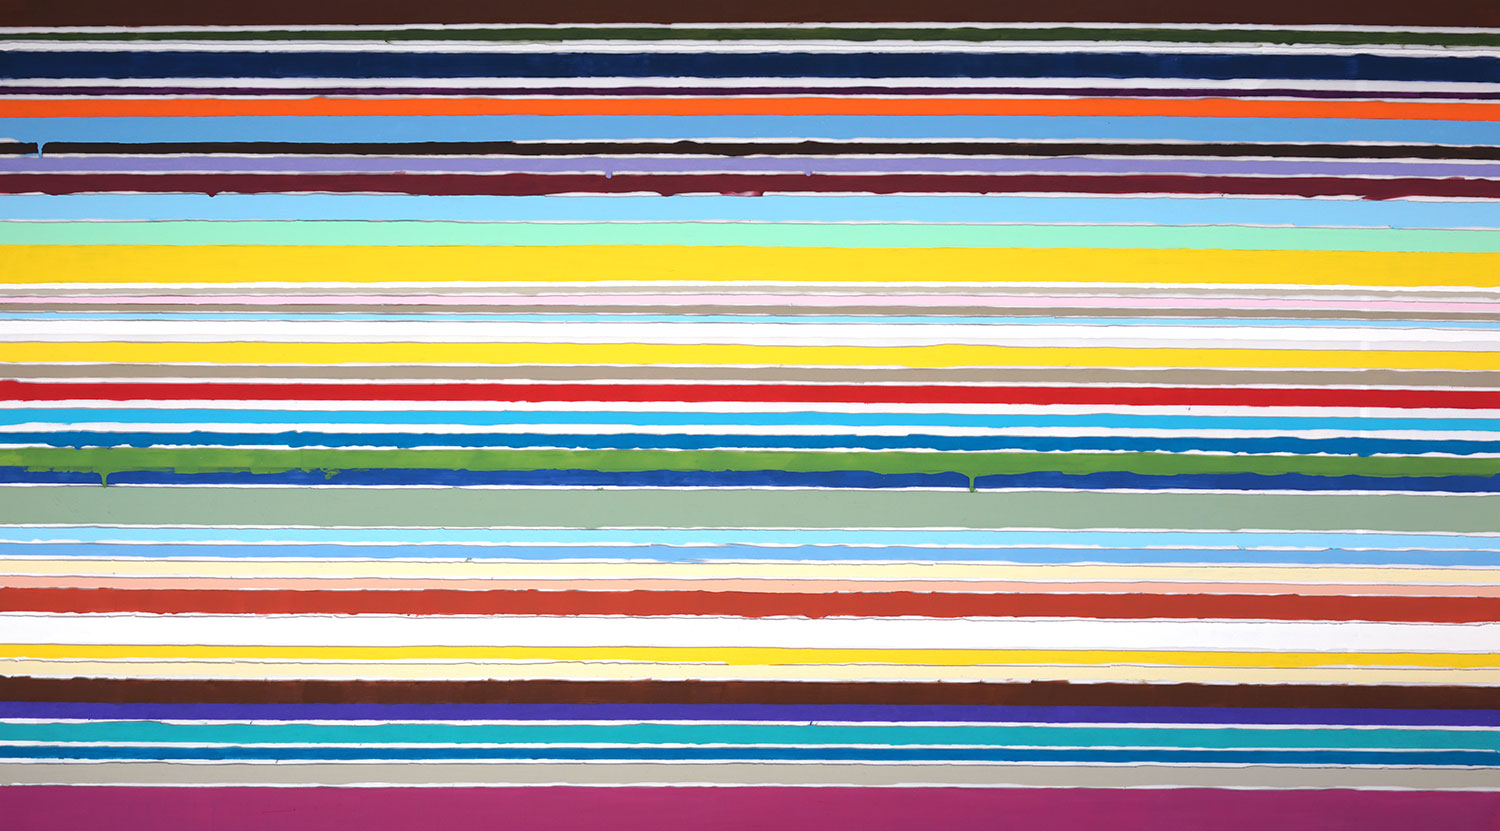 New Day, 2020, acrylic on acrylic, 66 x 38.5<br><br>Kenneth Noland's painting transforms into a social experience. Viewers apply the 41 color stripes onto the off white background.